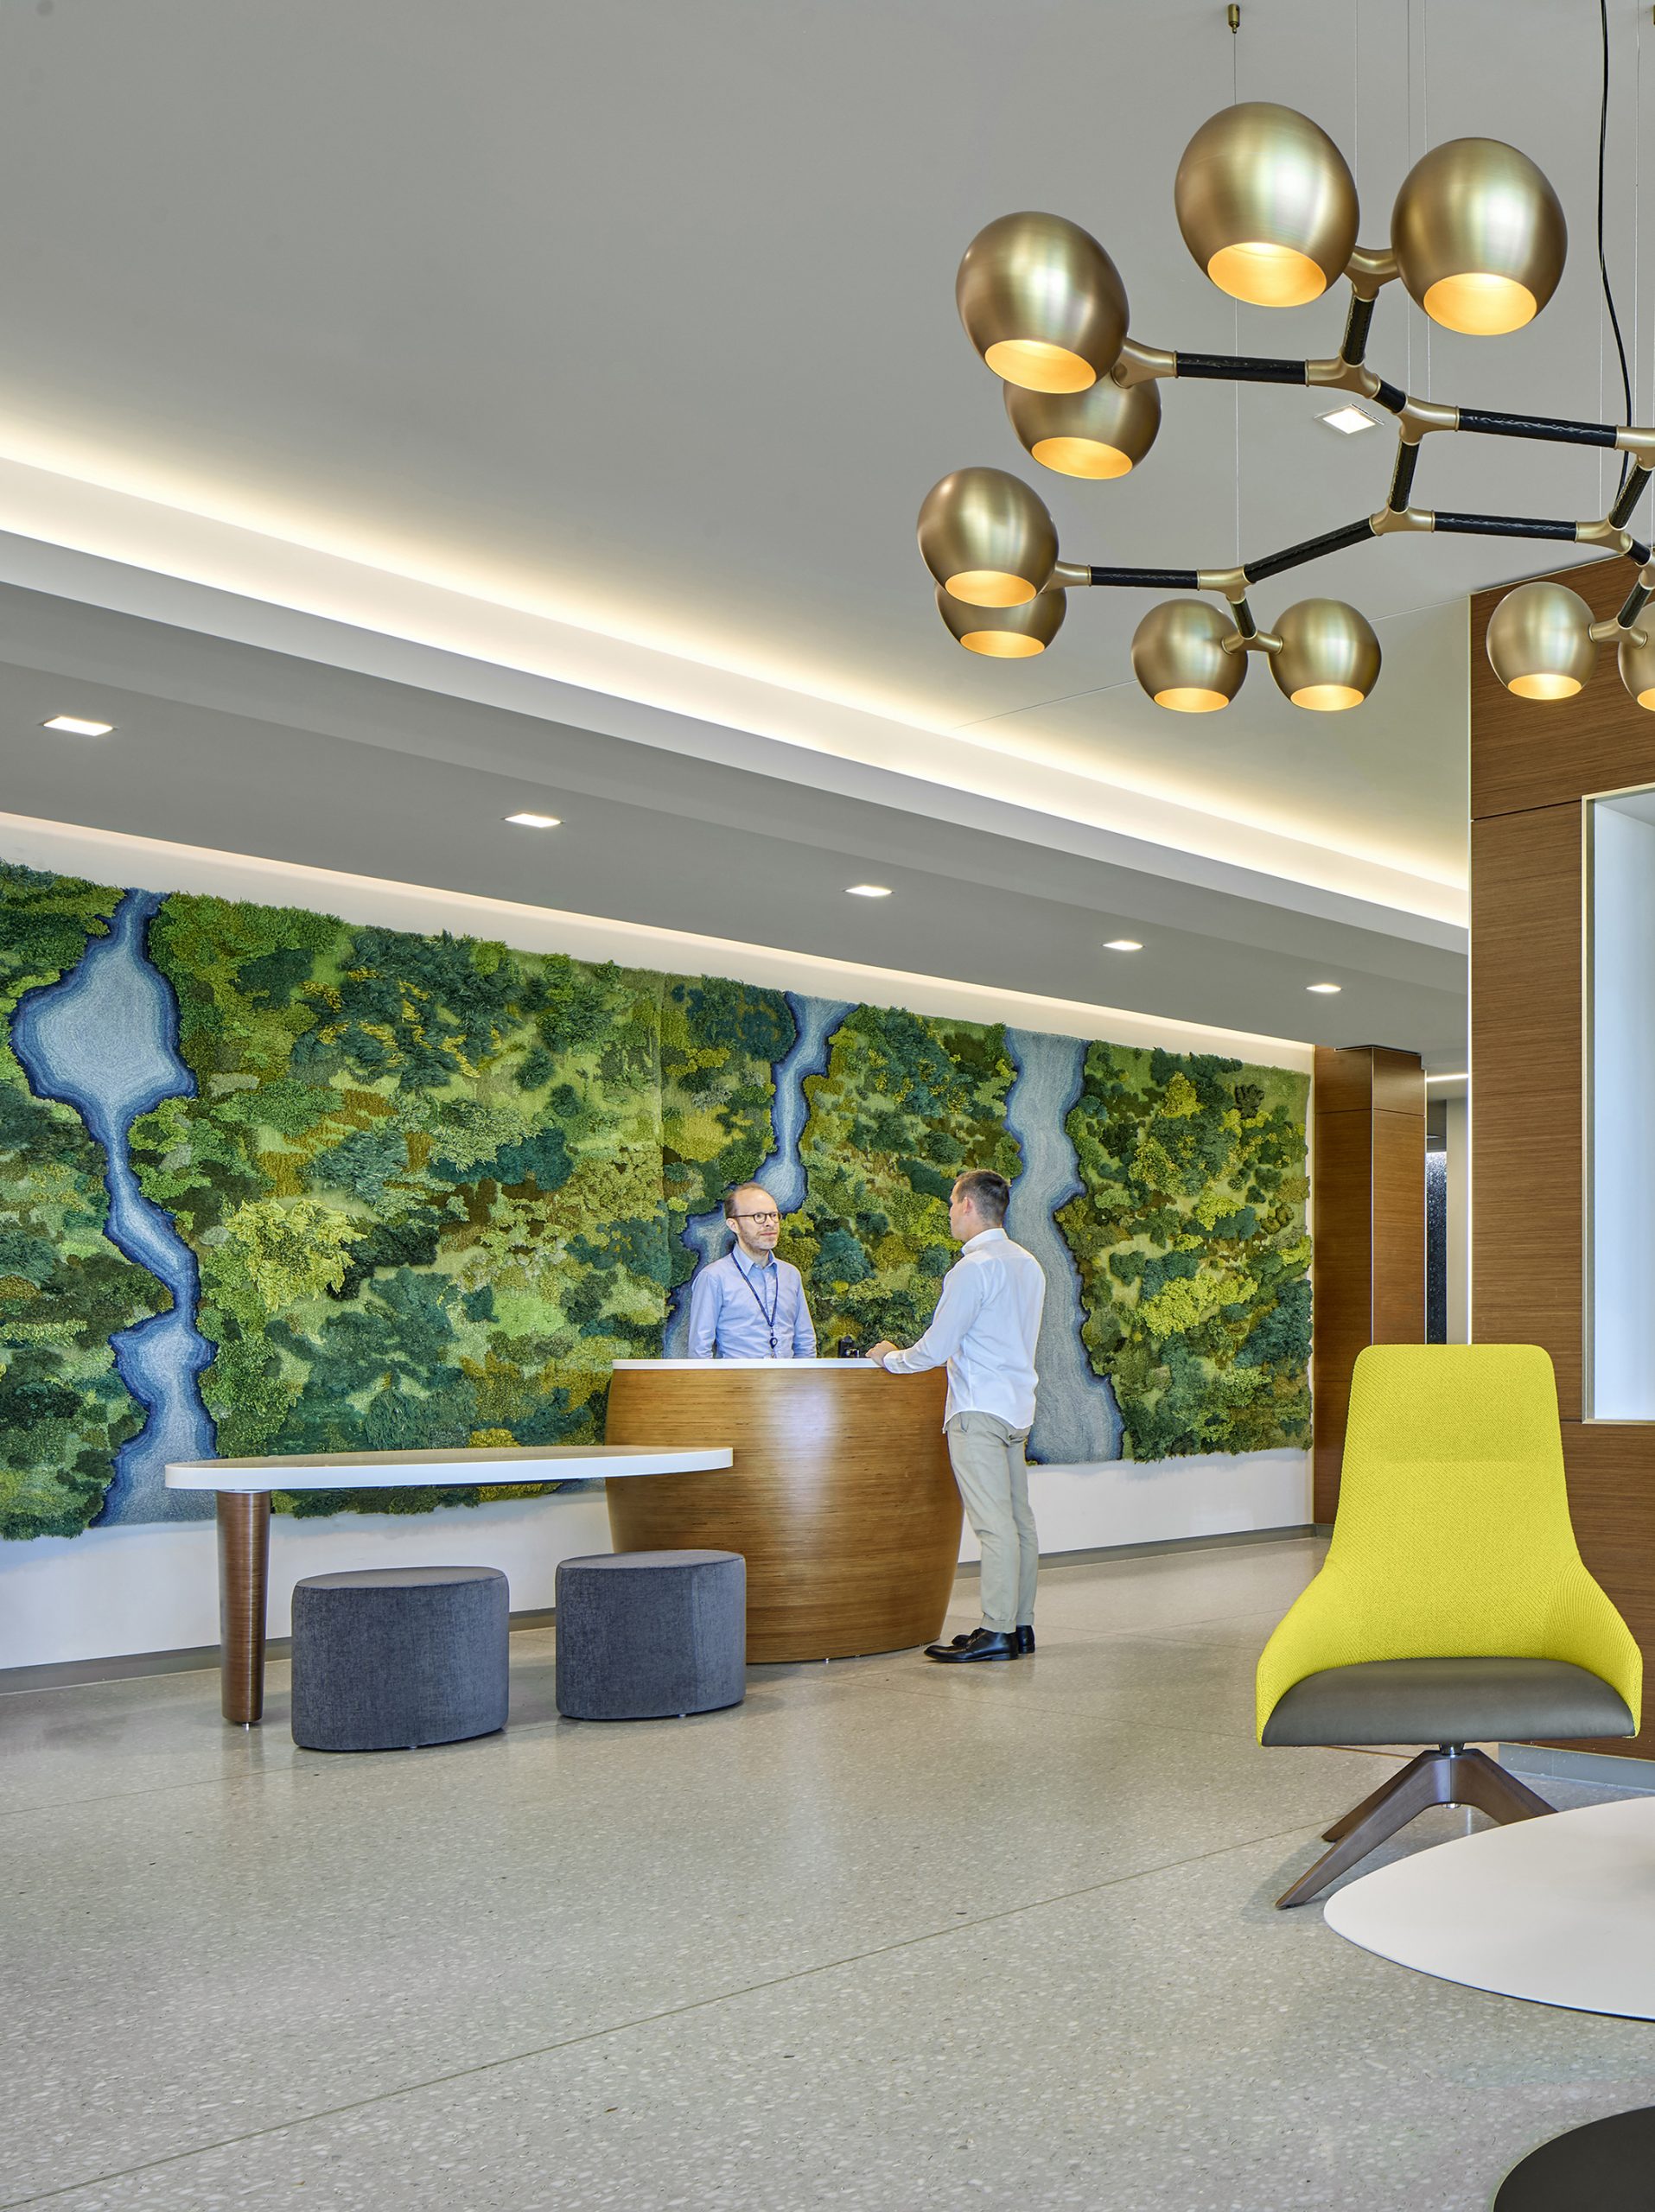 Long Island Tapestries, by Alexandra Kehayoglou for Memorial Sloan Kettering Nassau, Uniondale, NY